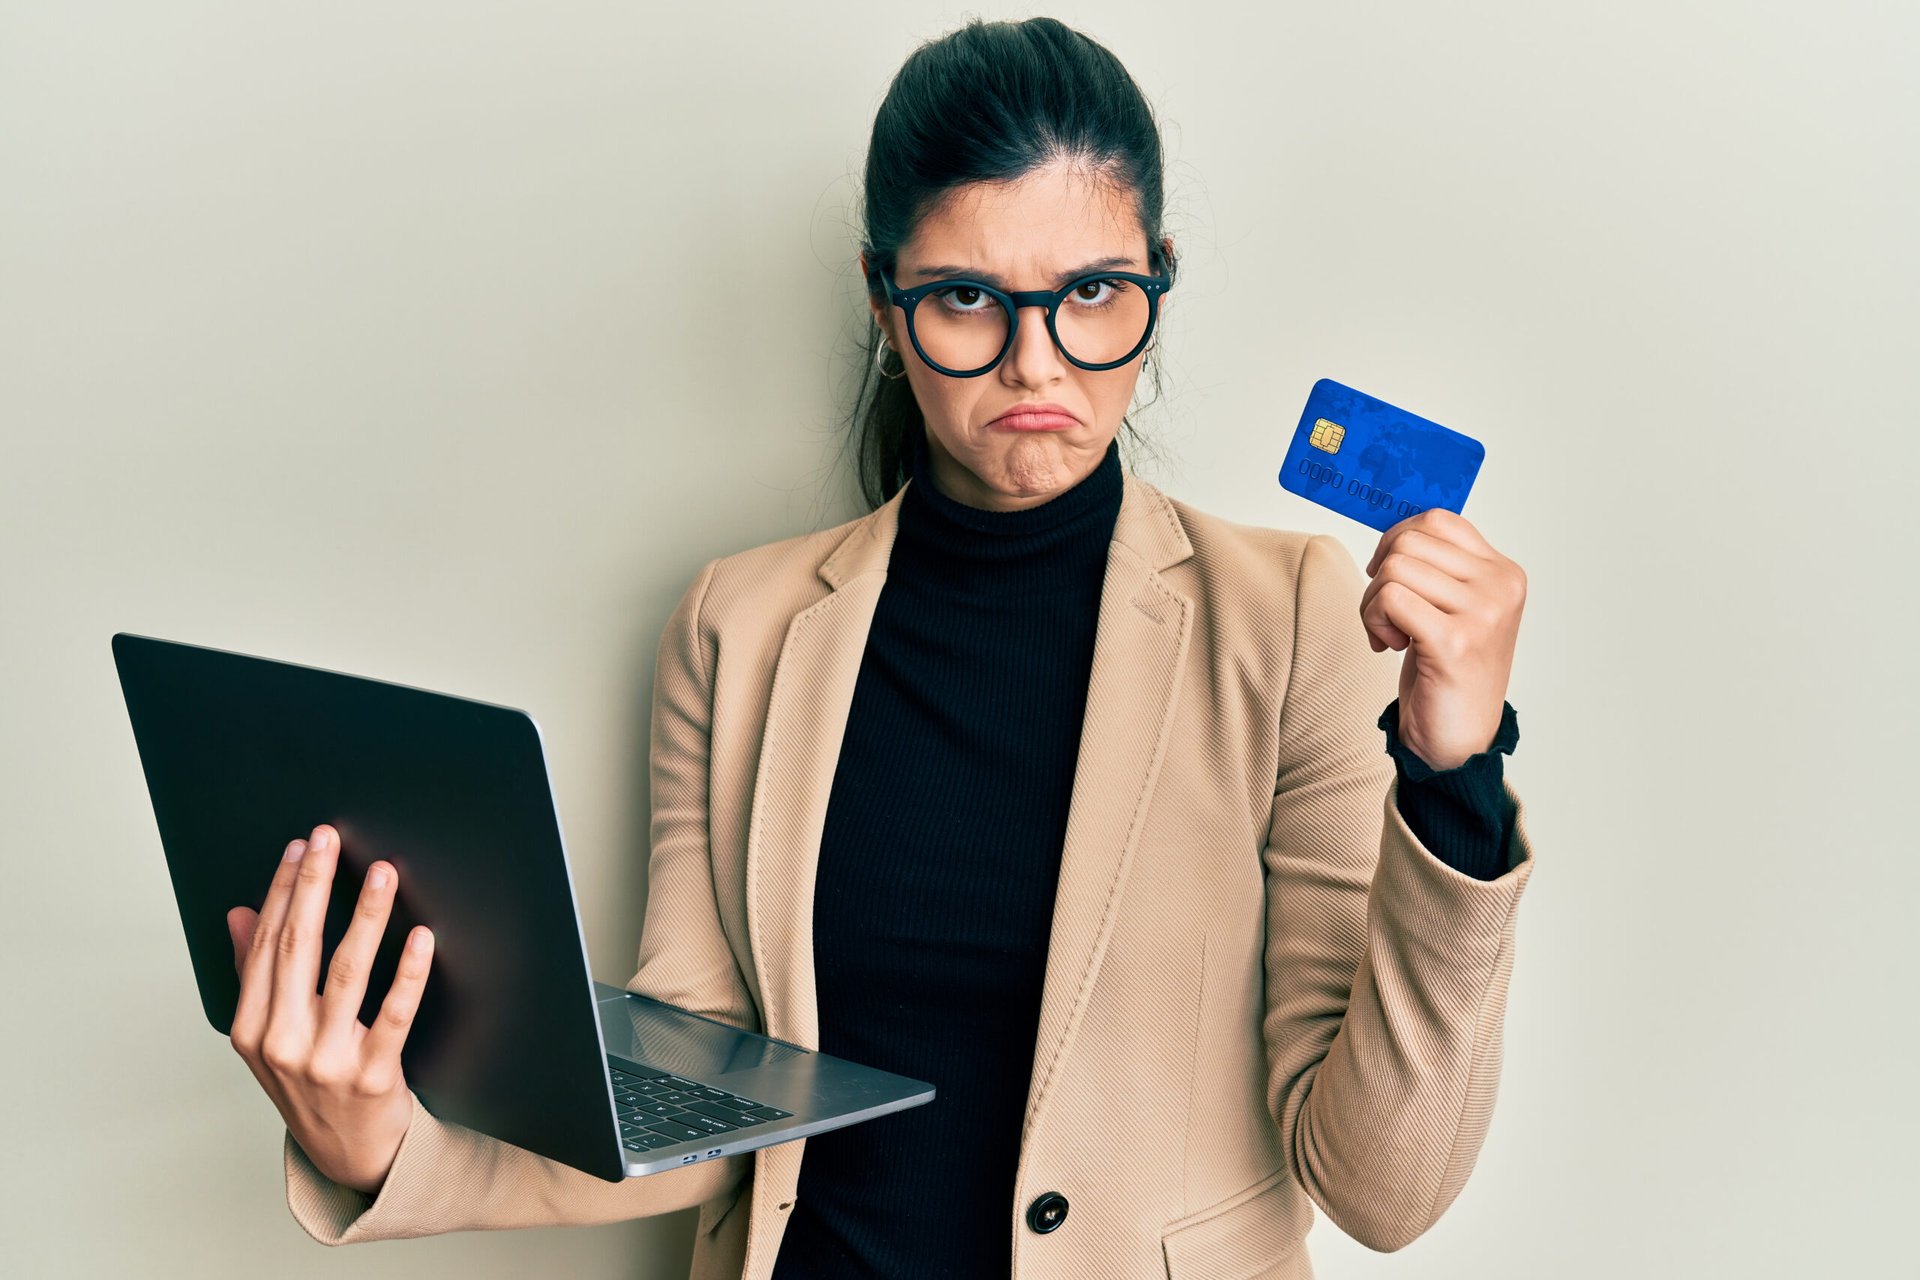 Upset woman holding a credit card and laptop